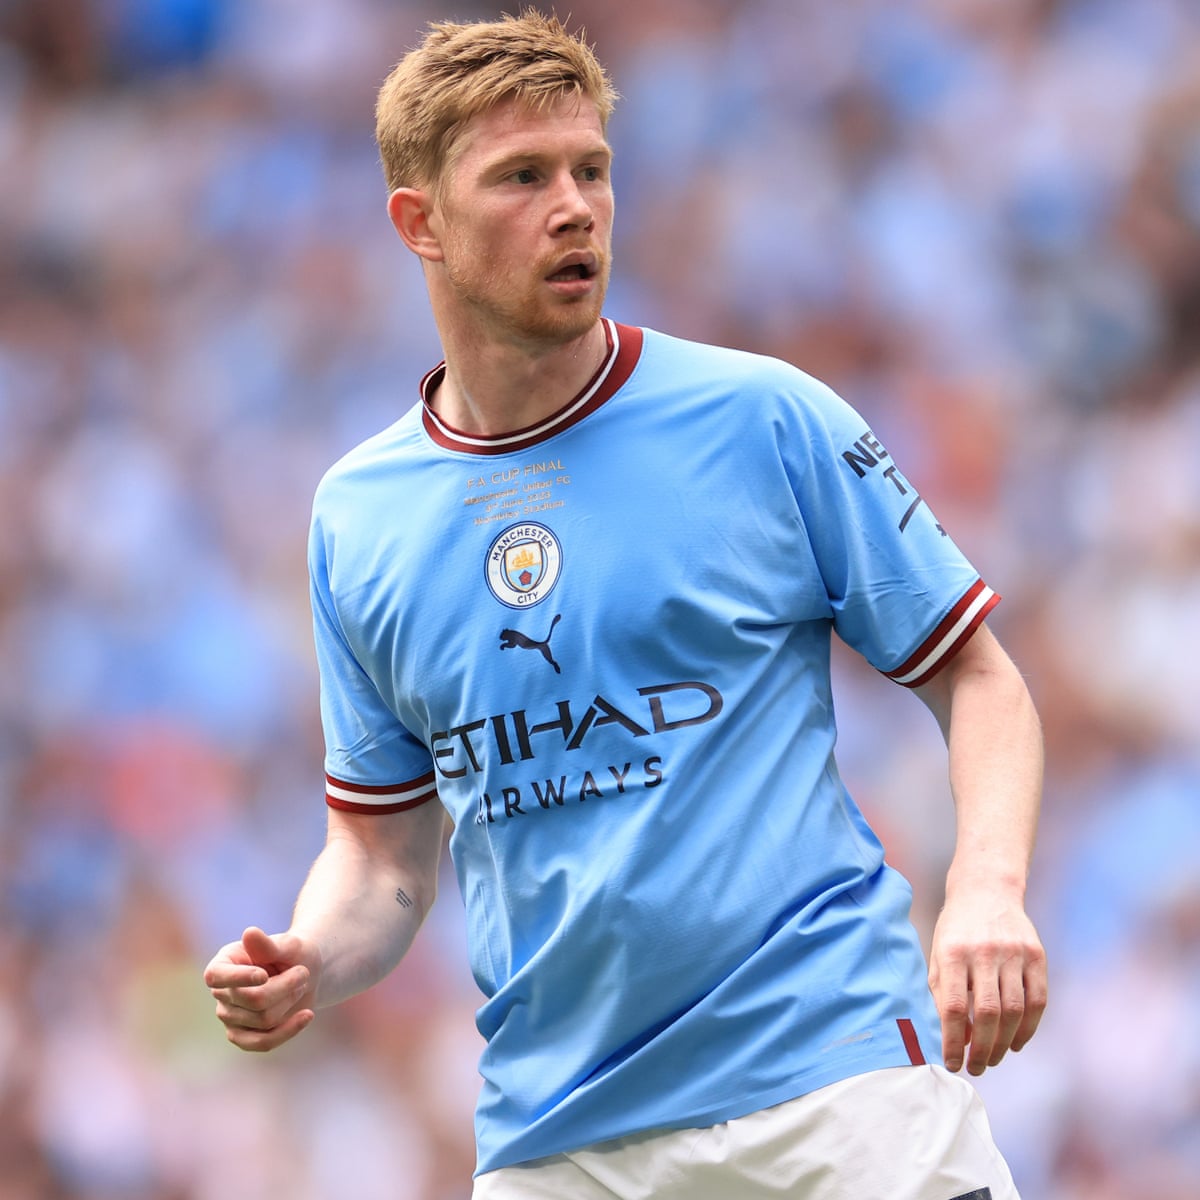 De Bruyne insists his career will not be defined by Champions League final  | Kevin De Bruyne | The Guardian